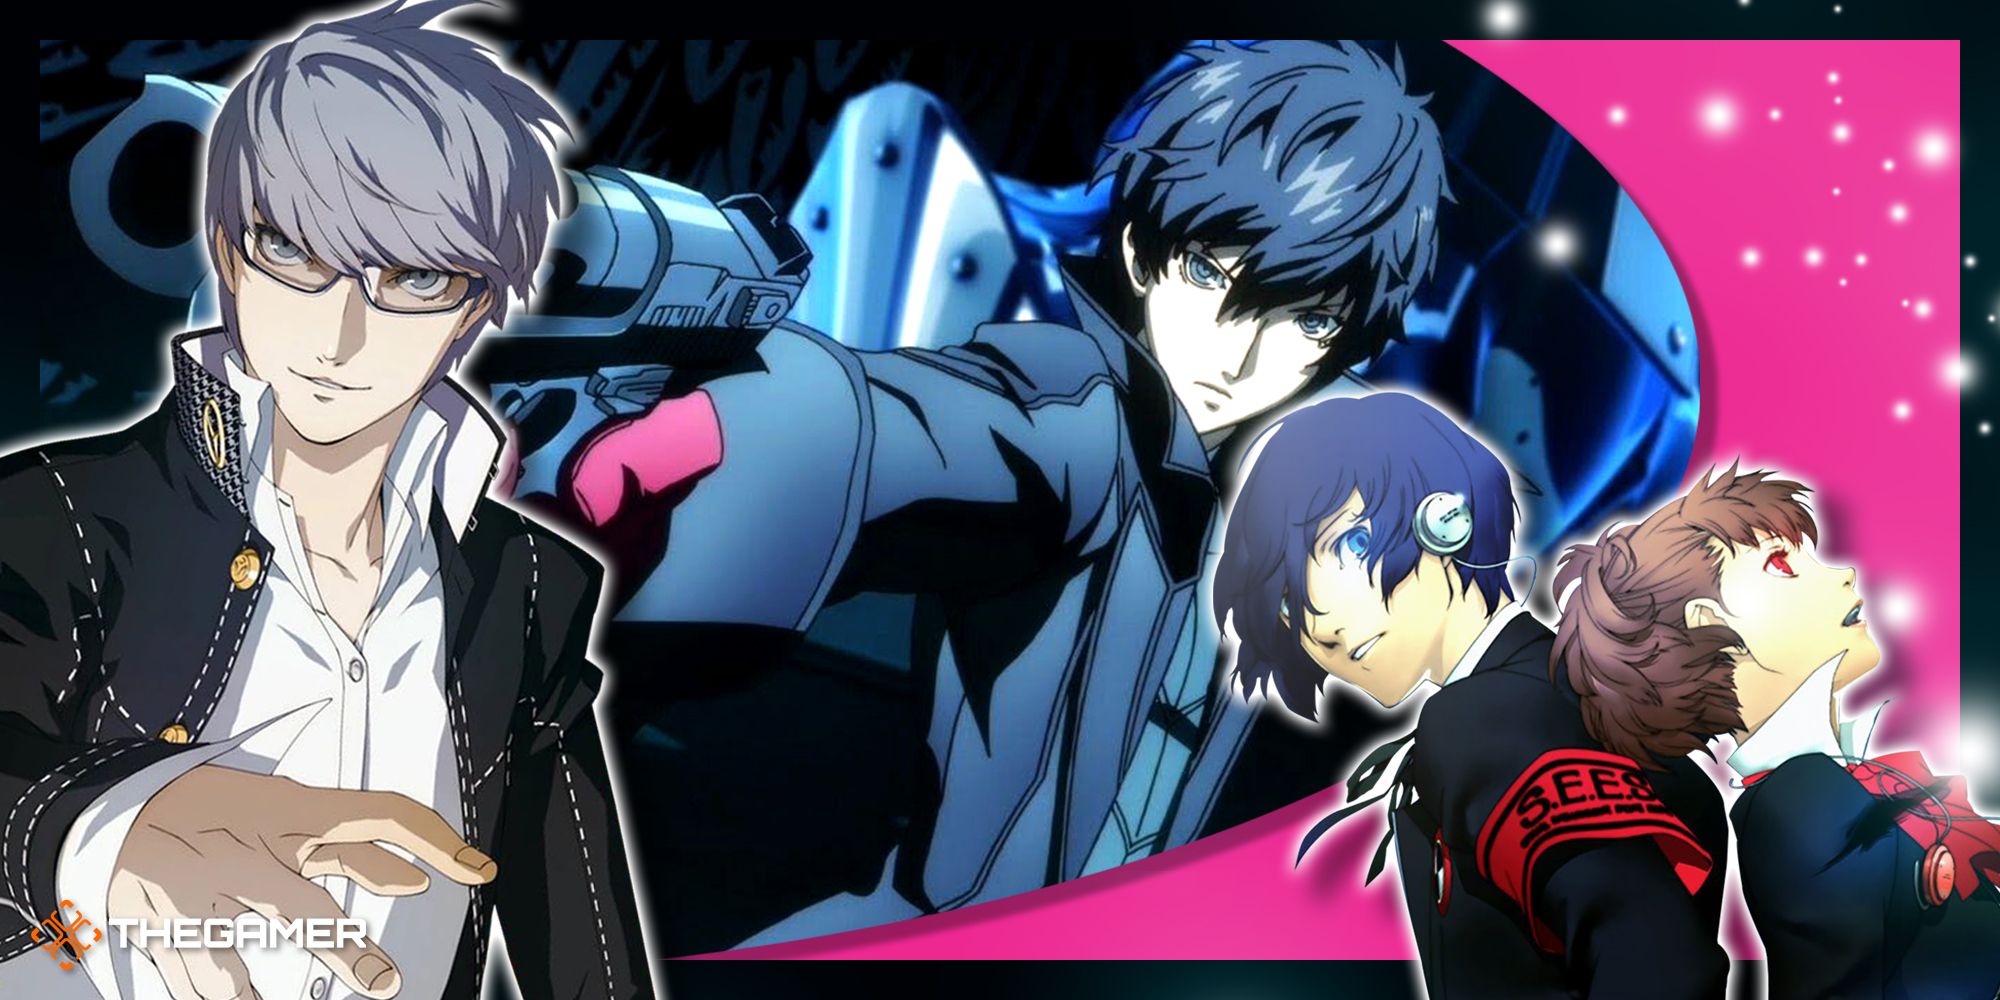 Game images from Persona 3, Persona 4 and Persona 5 Royal.